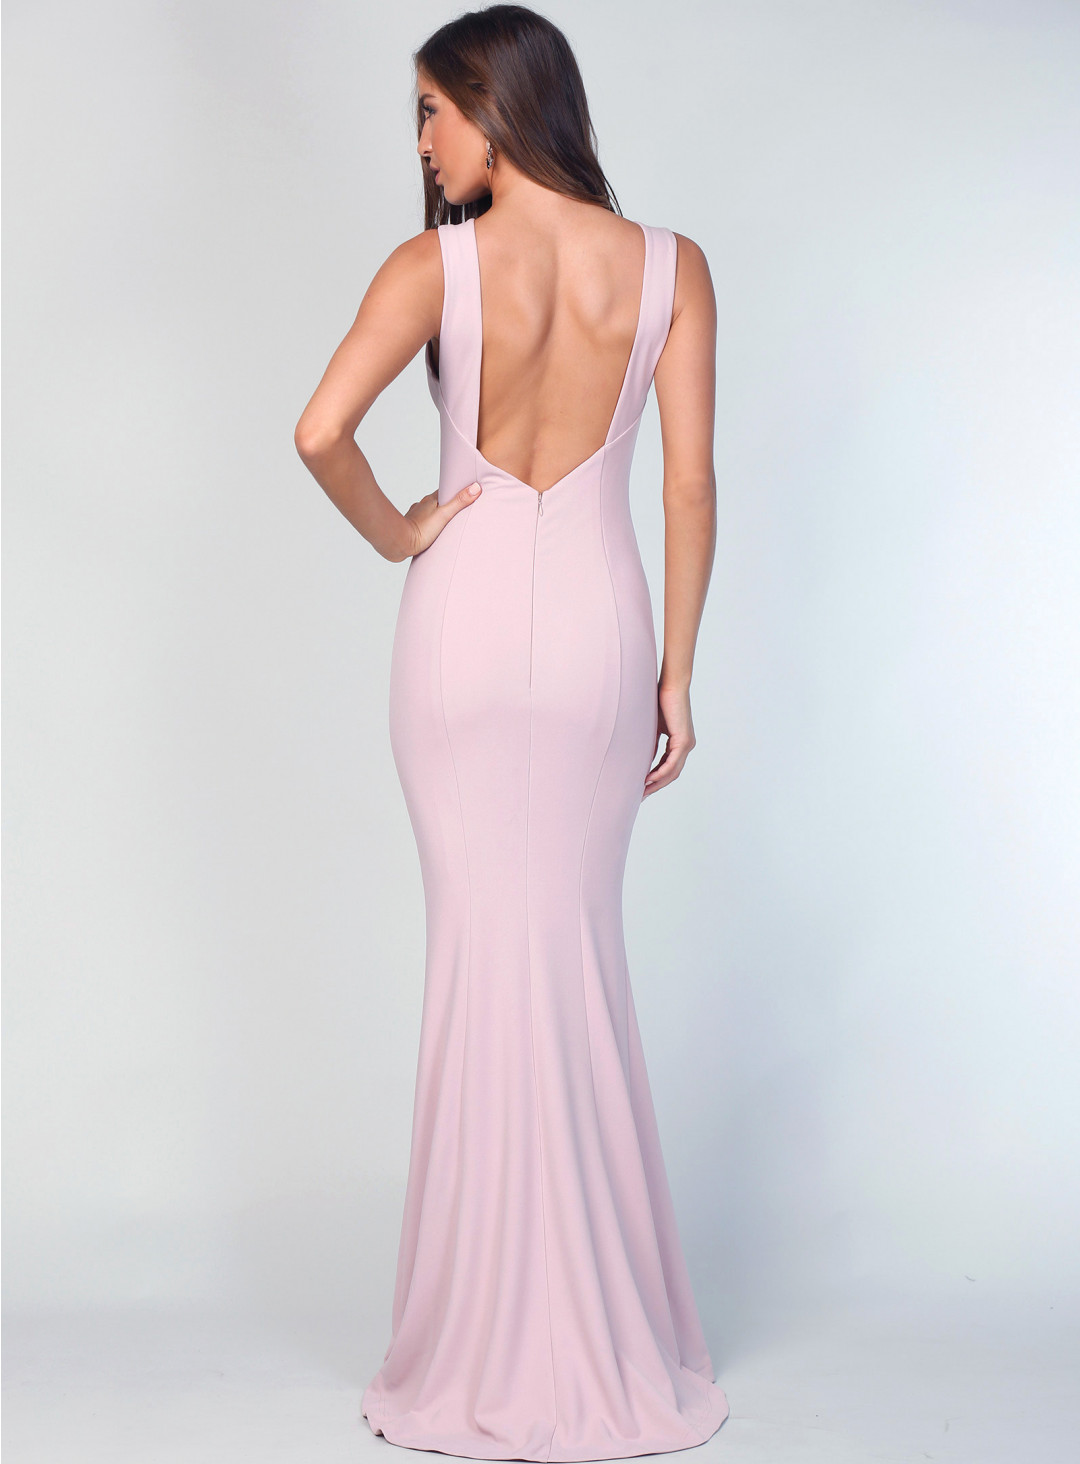 DOMINICK GOWN DRESS